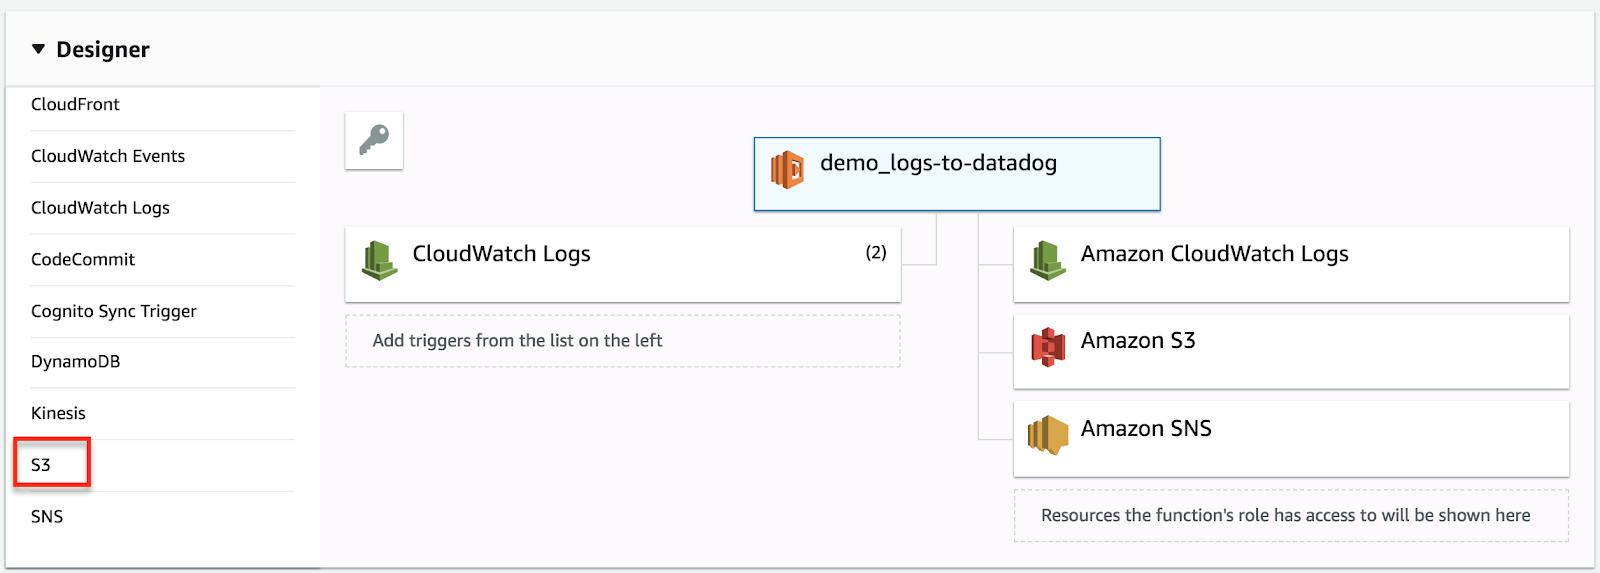 how to use sql on mac to communicate with aws dynamo